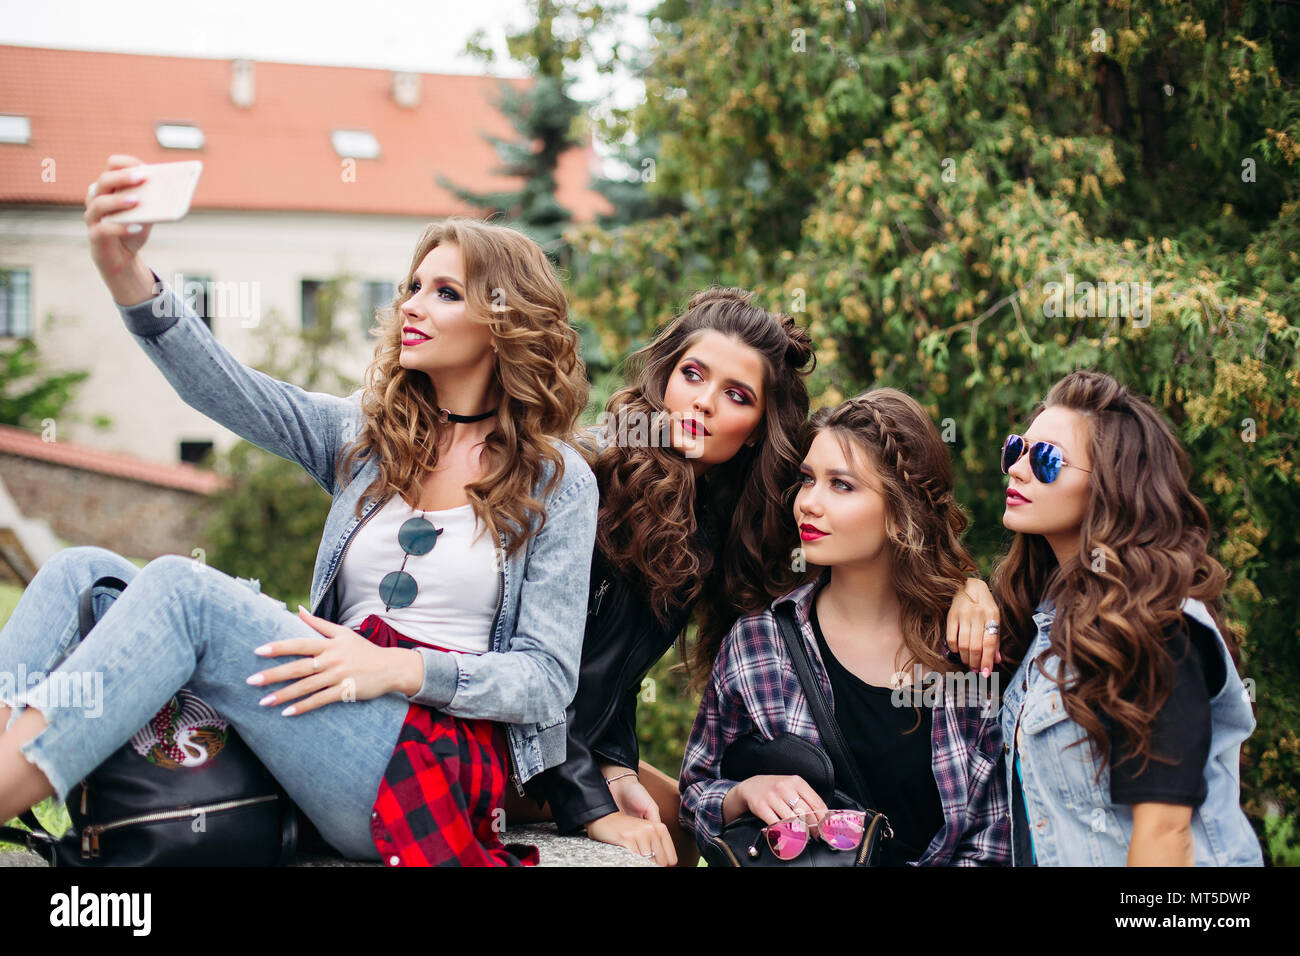 Fashionable ladies with hairstyle taking selfie outdoors. Stock Photo